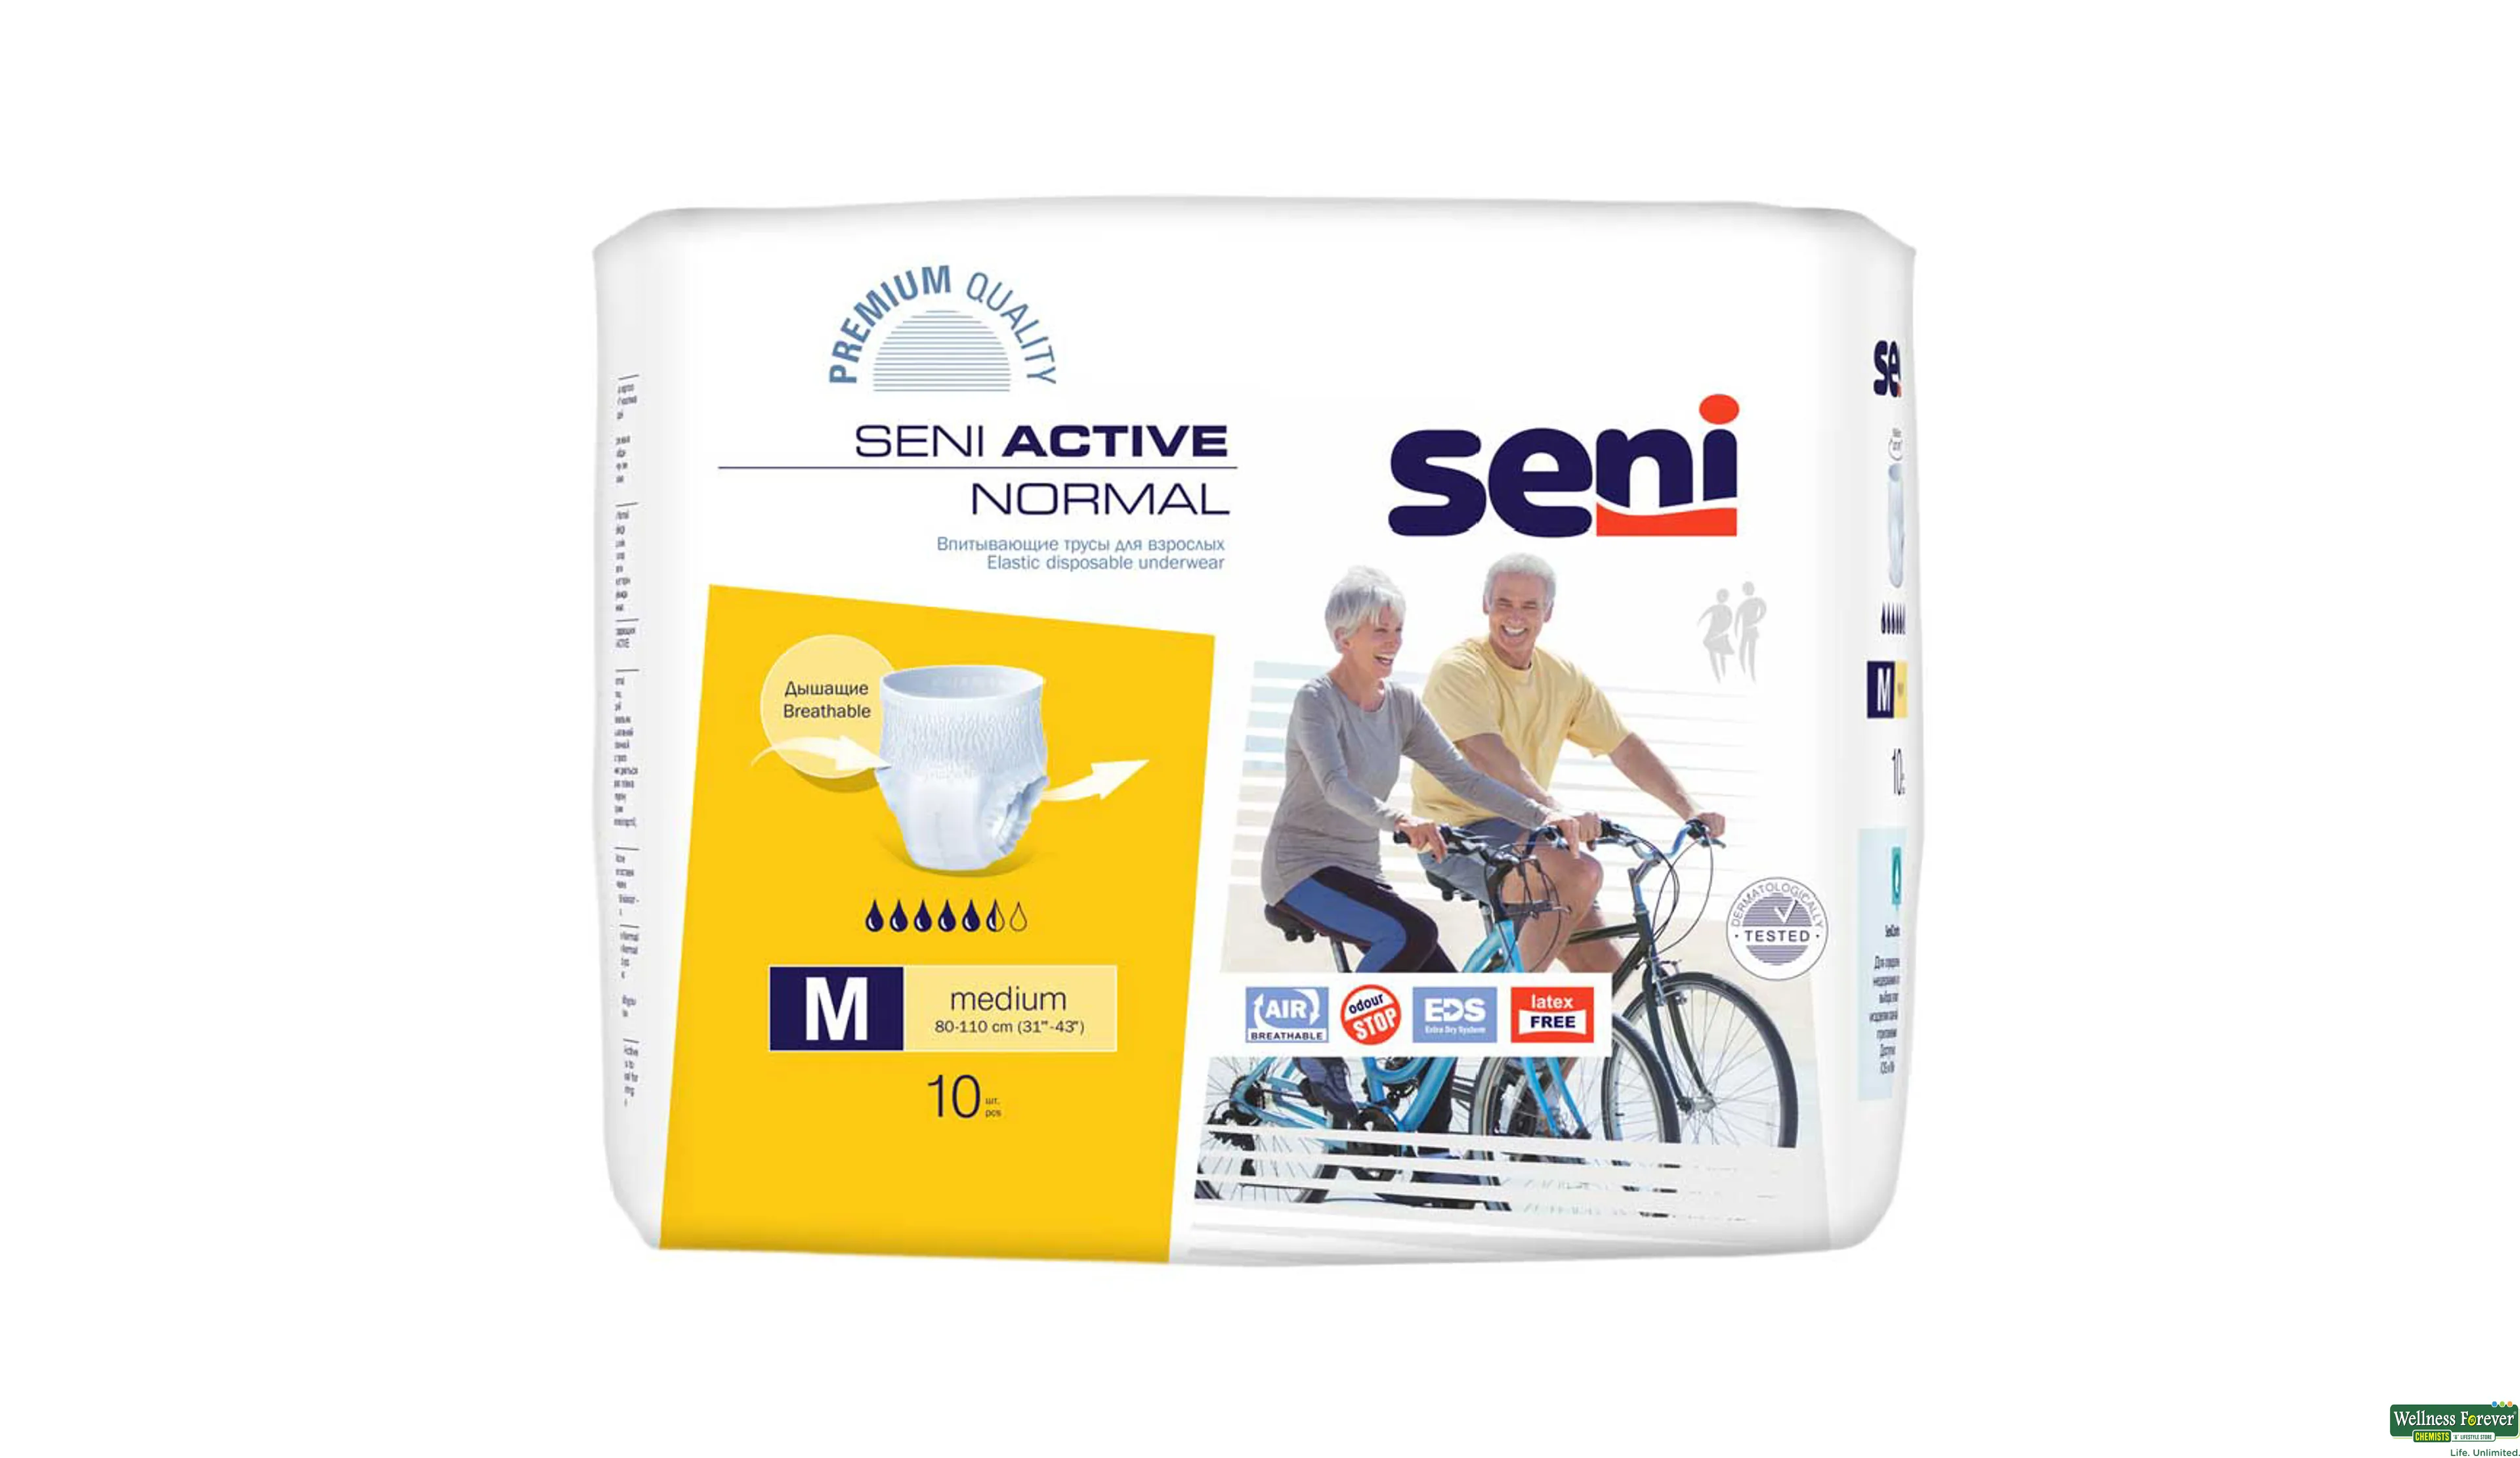 SENI ACTIVE NORMAL PULLUP DIAPERS M 10PC- 1, 10PC, 